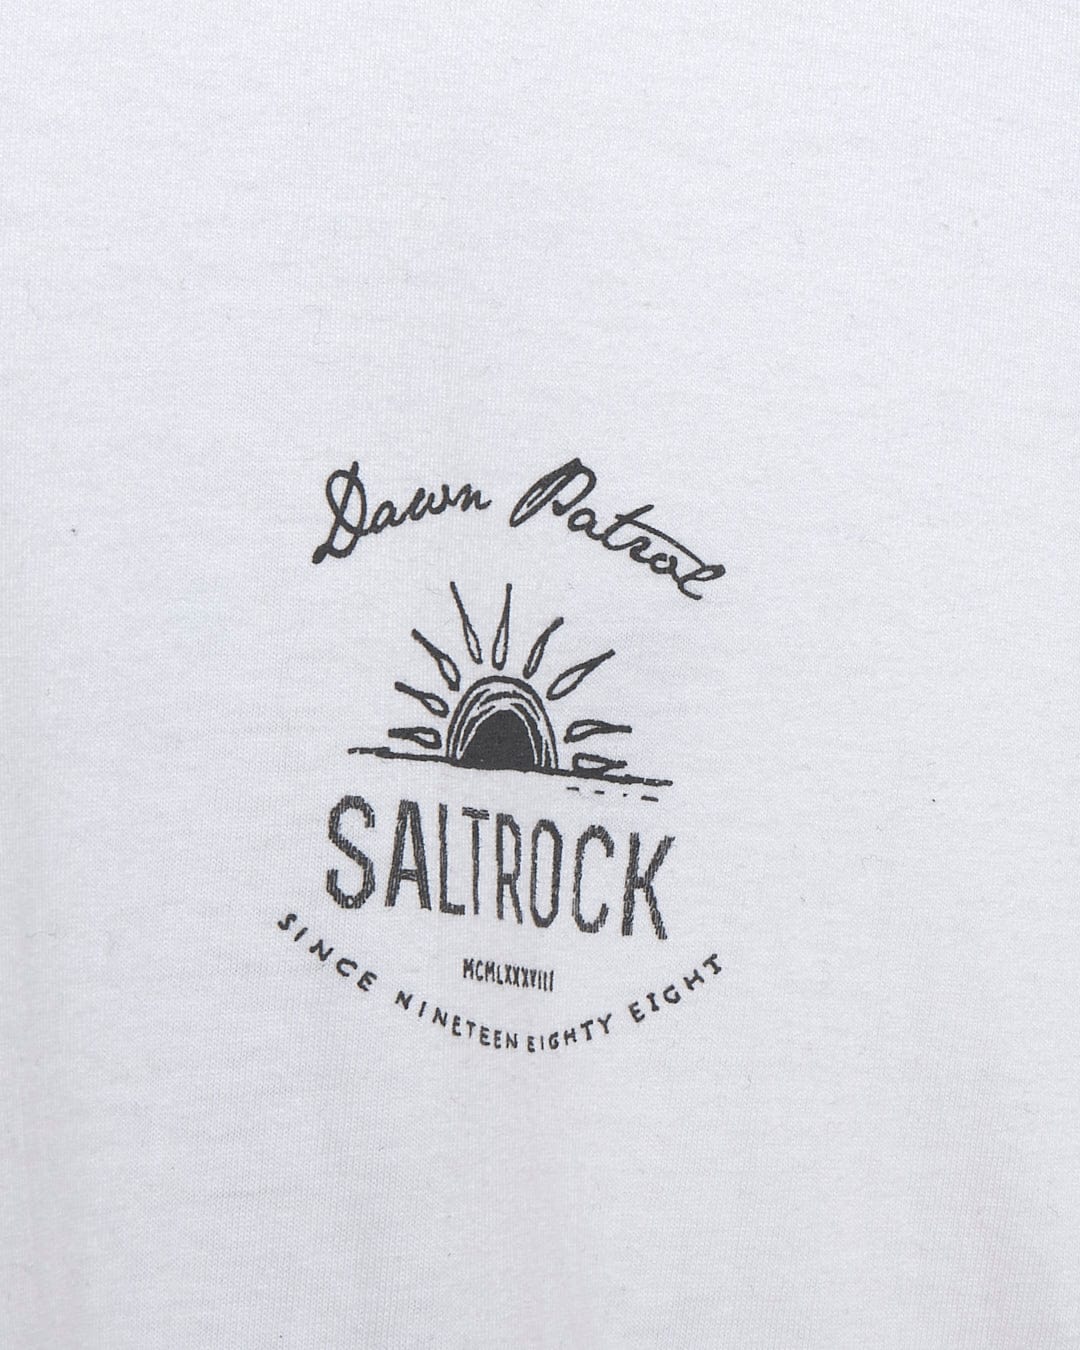 A Saltrock Dawn Patrol - Mens Short Sleeve T-Shirt - White with the words saltrock on it.